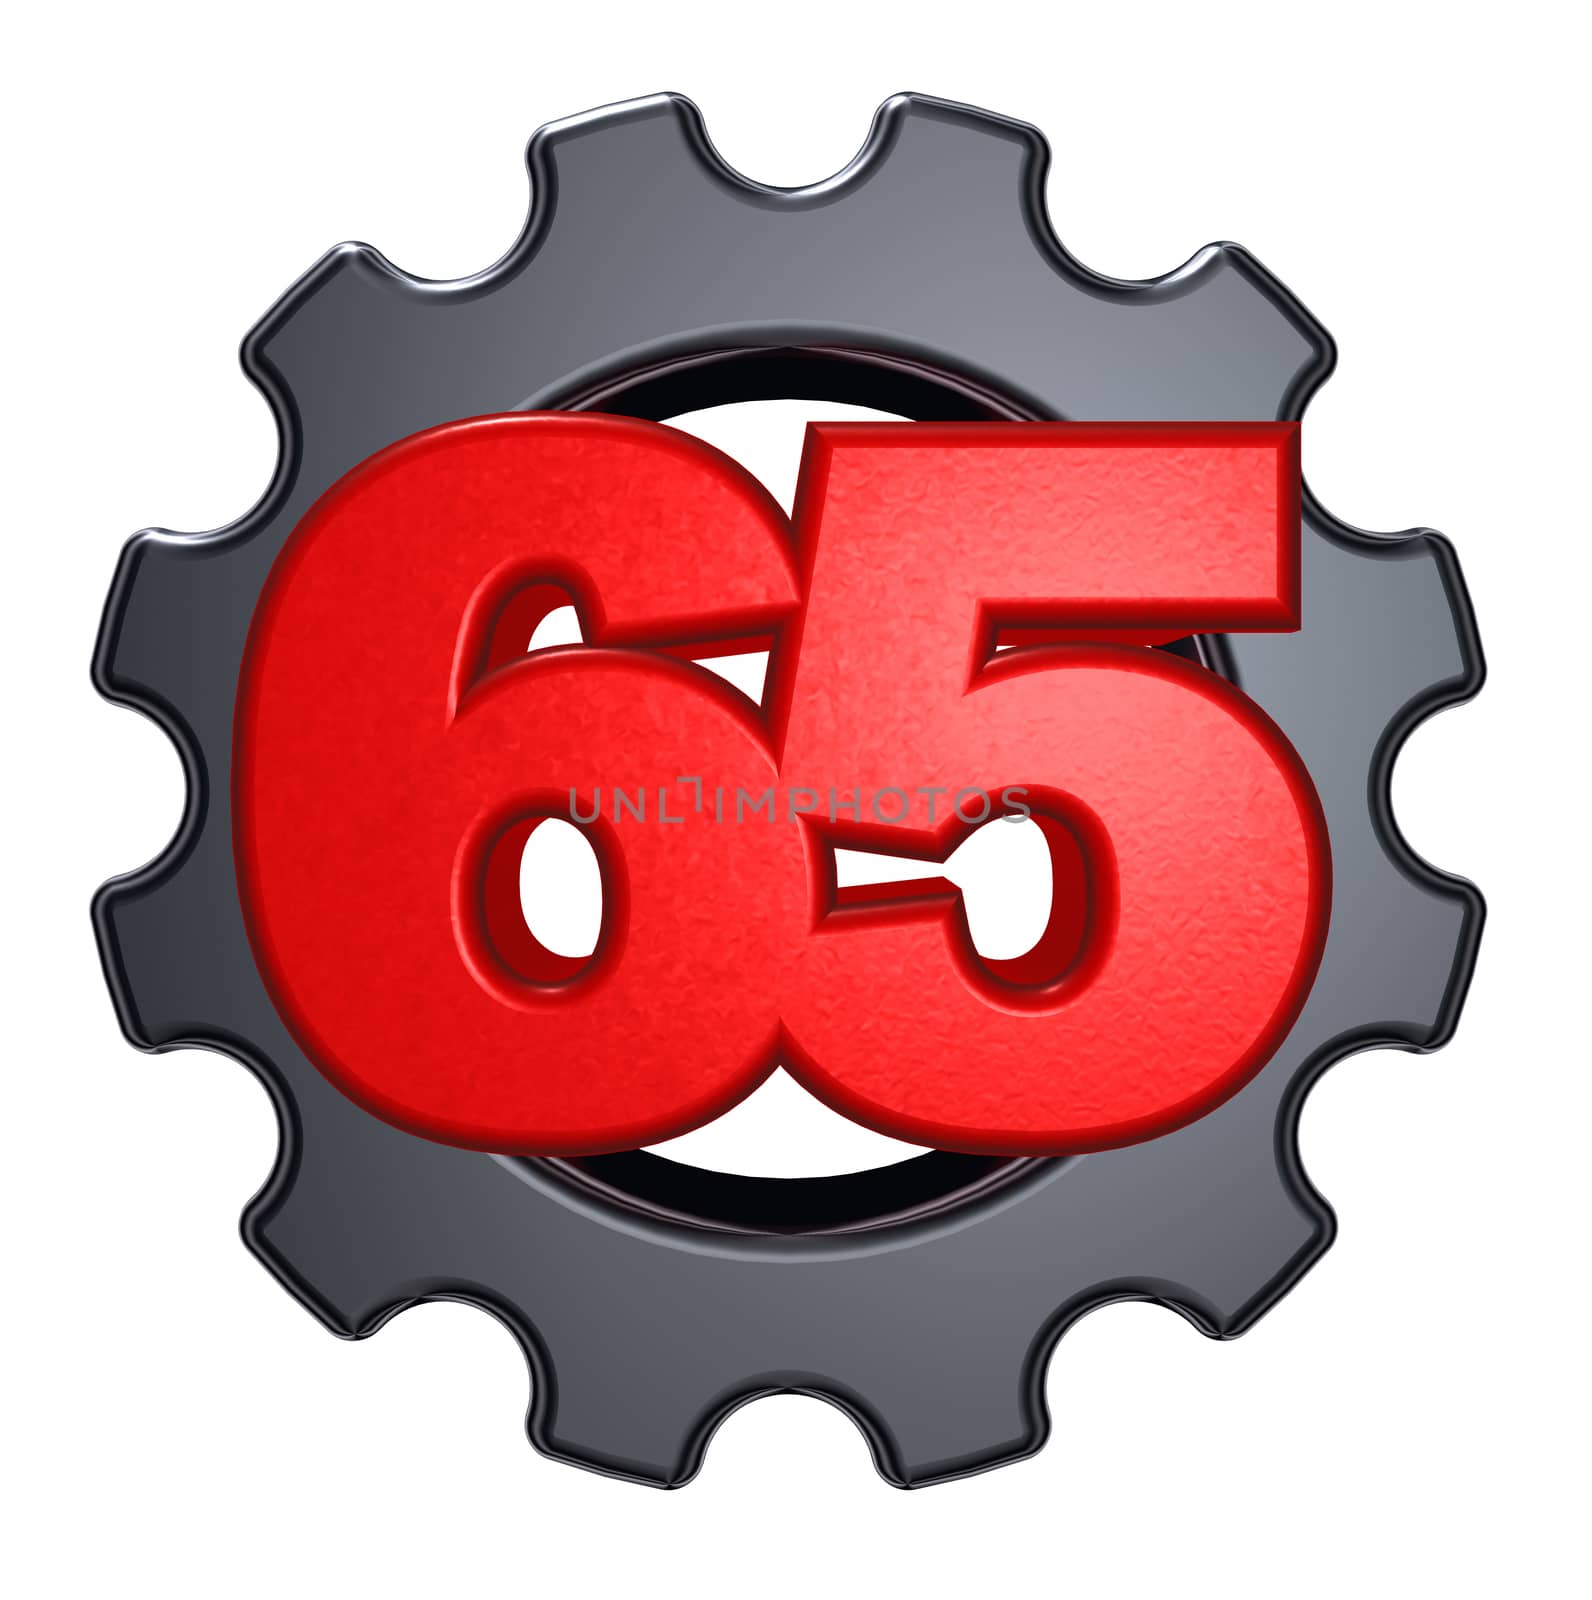 number sixty five and gear wheel on white background - 3d illustration